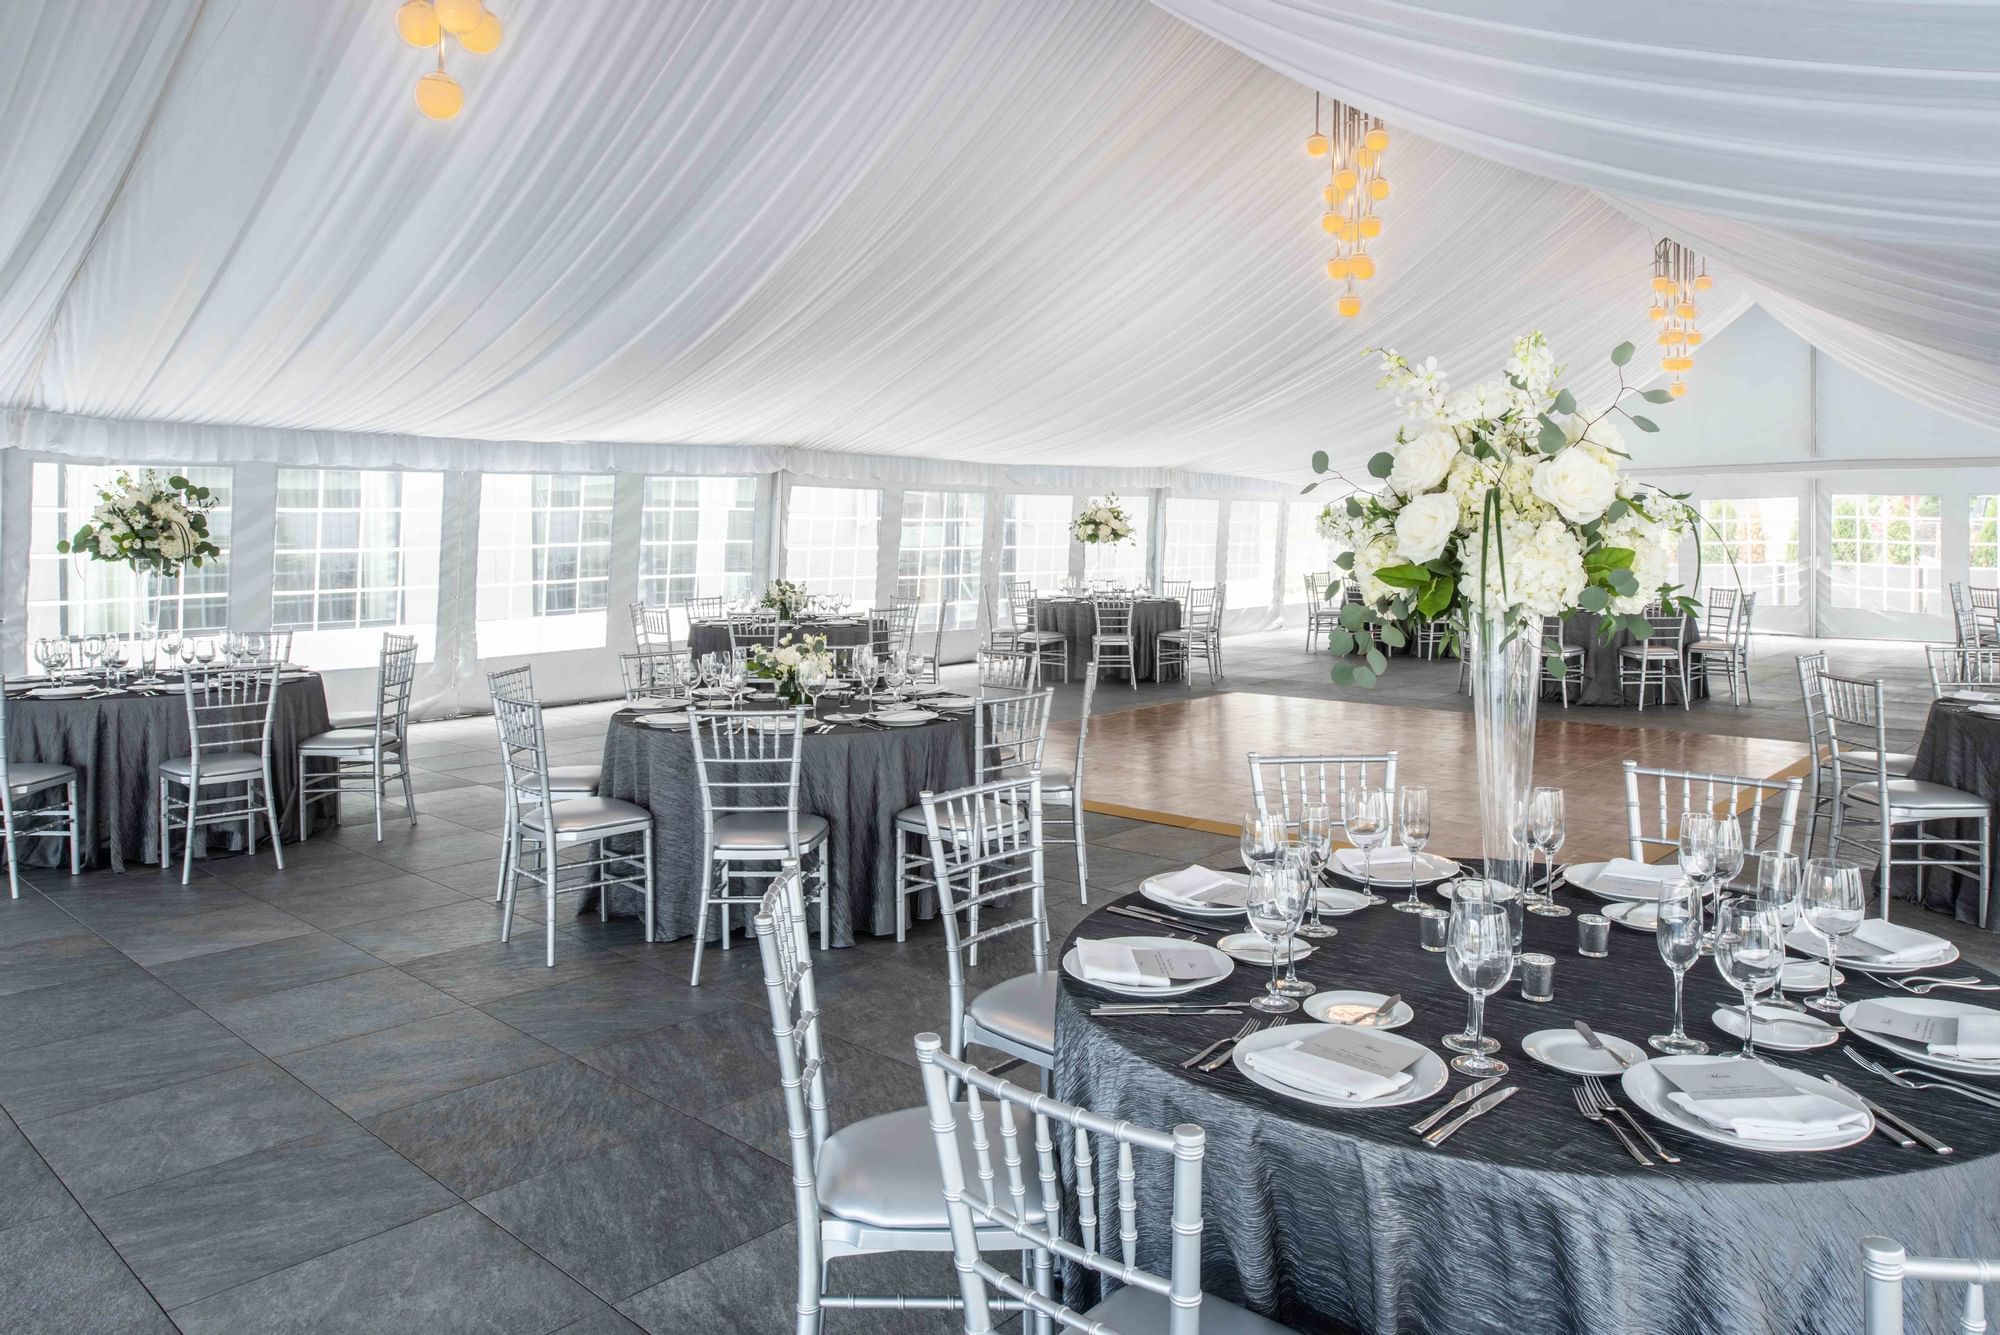 Outdoor event tent set for wedding reception